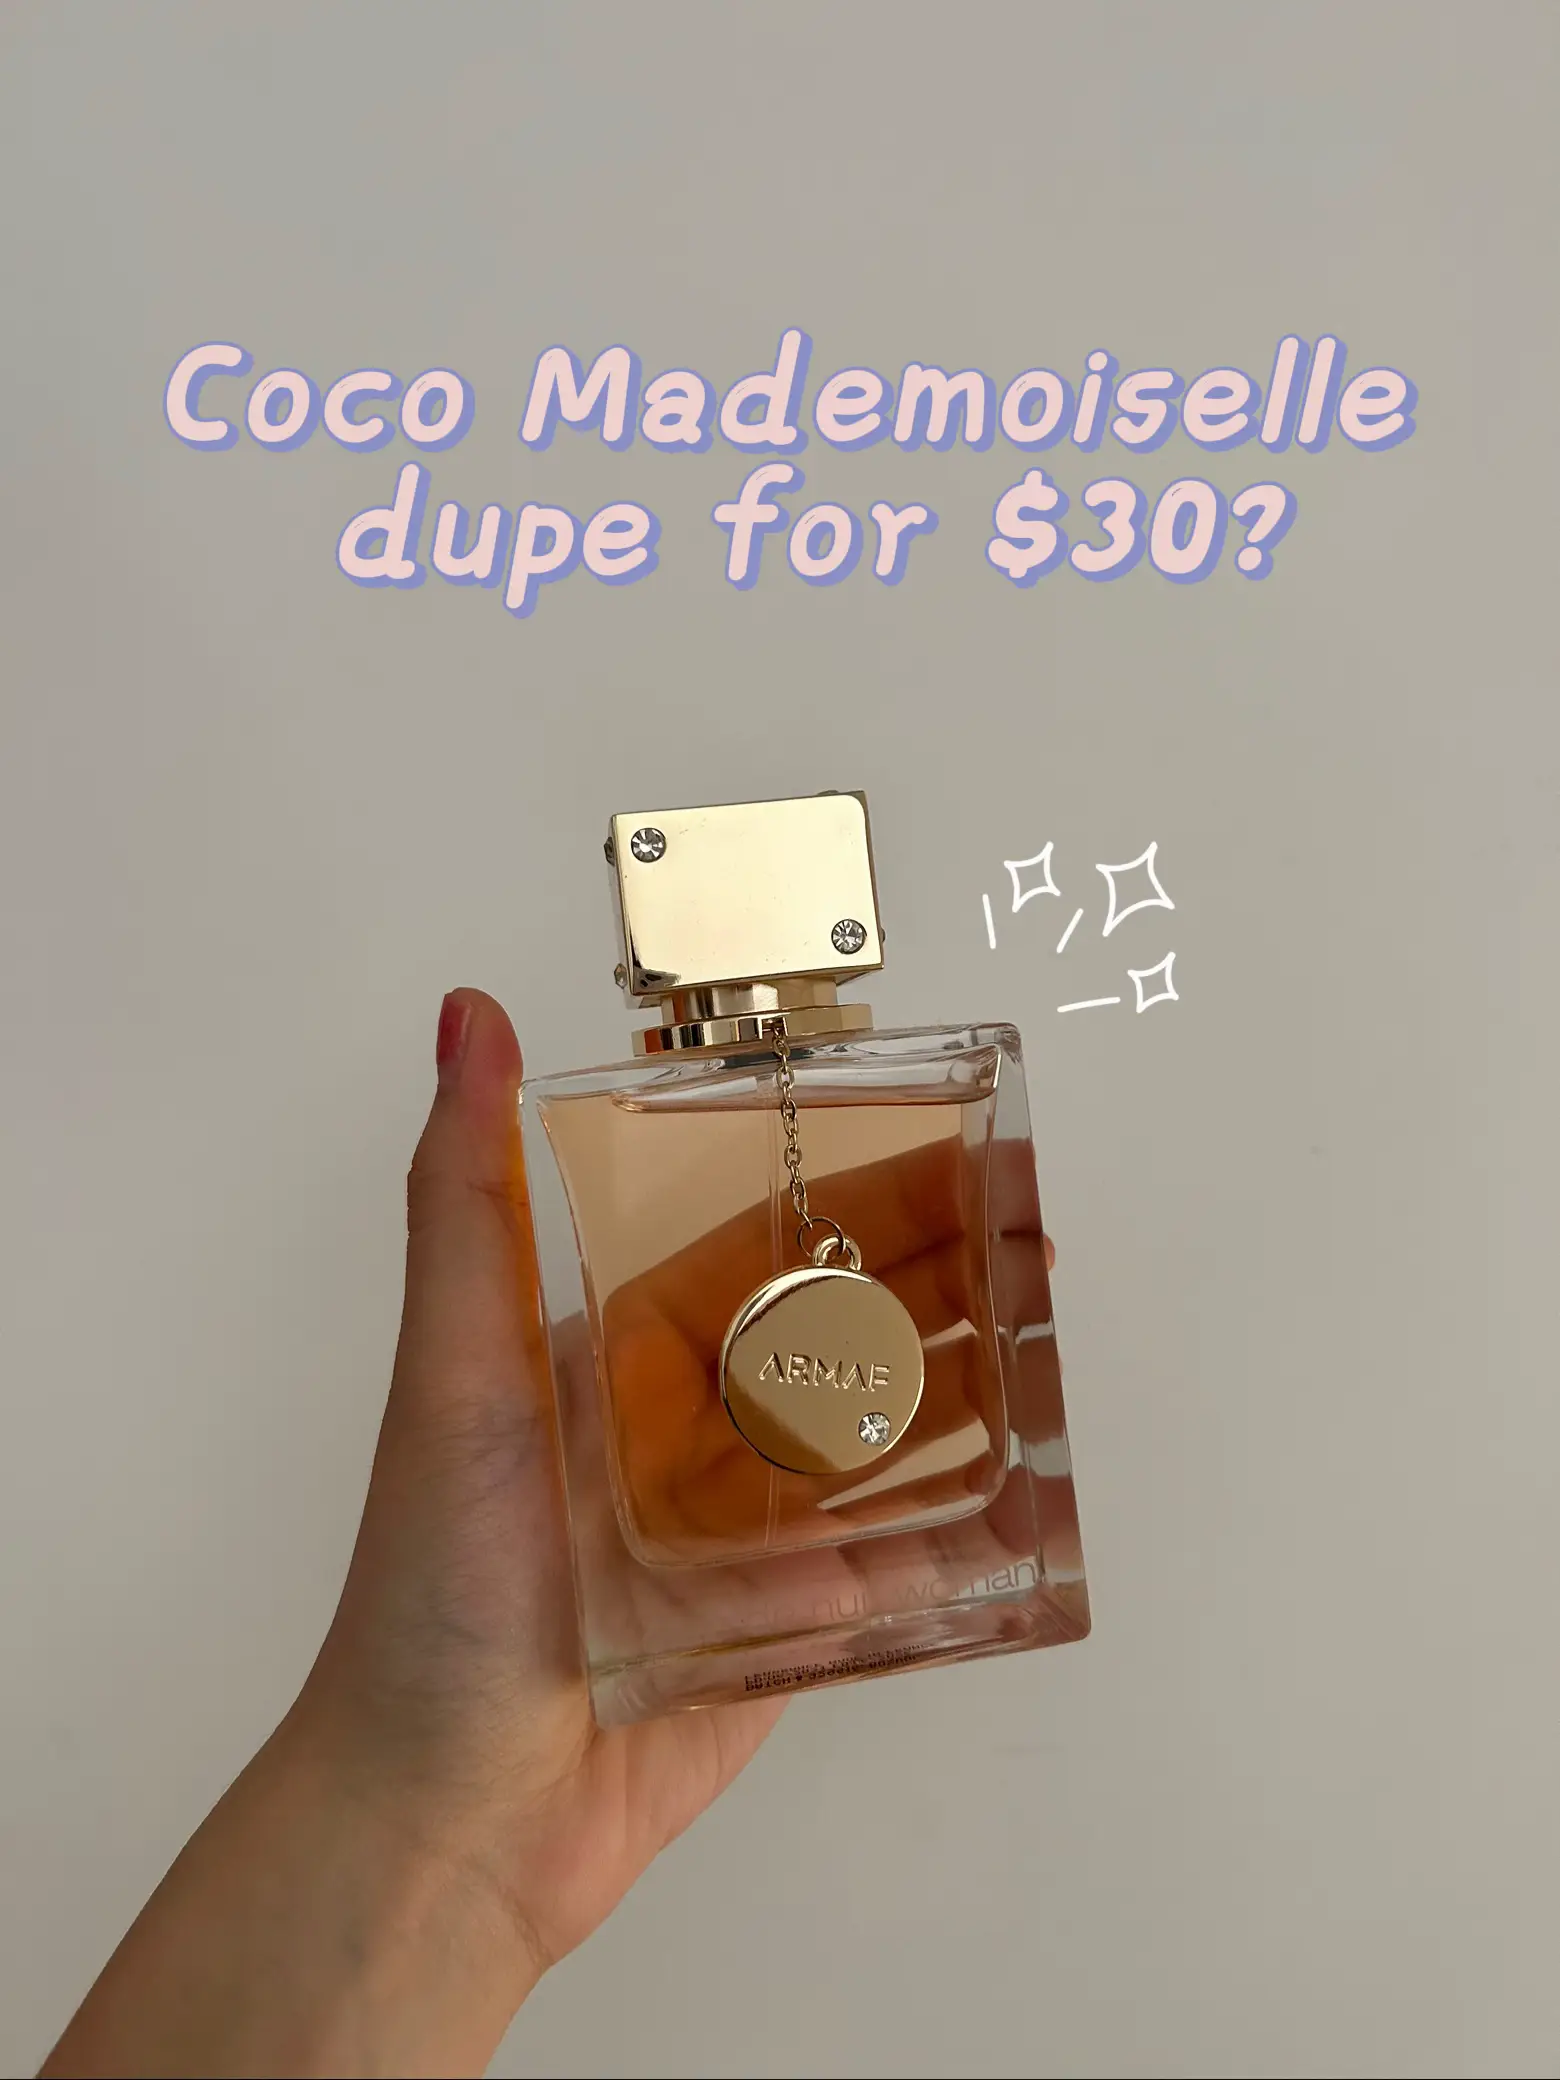 $30 Dupe for Coco Mademoiselle? 👀🌸, Video published by chloe